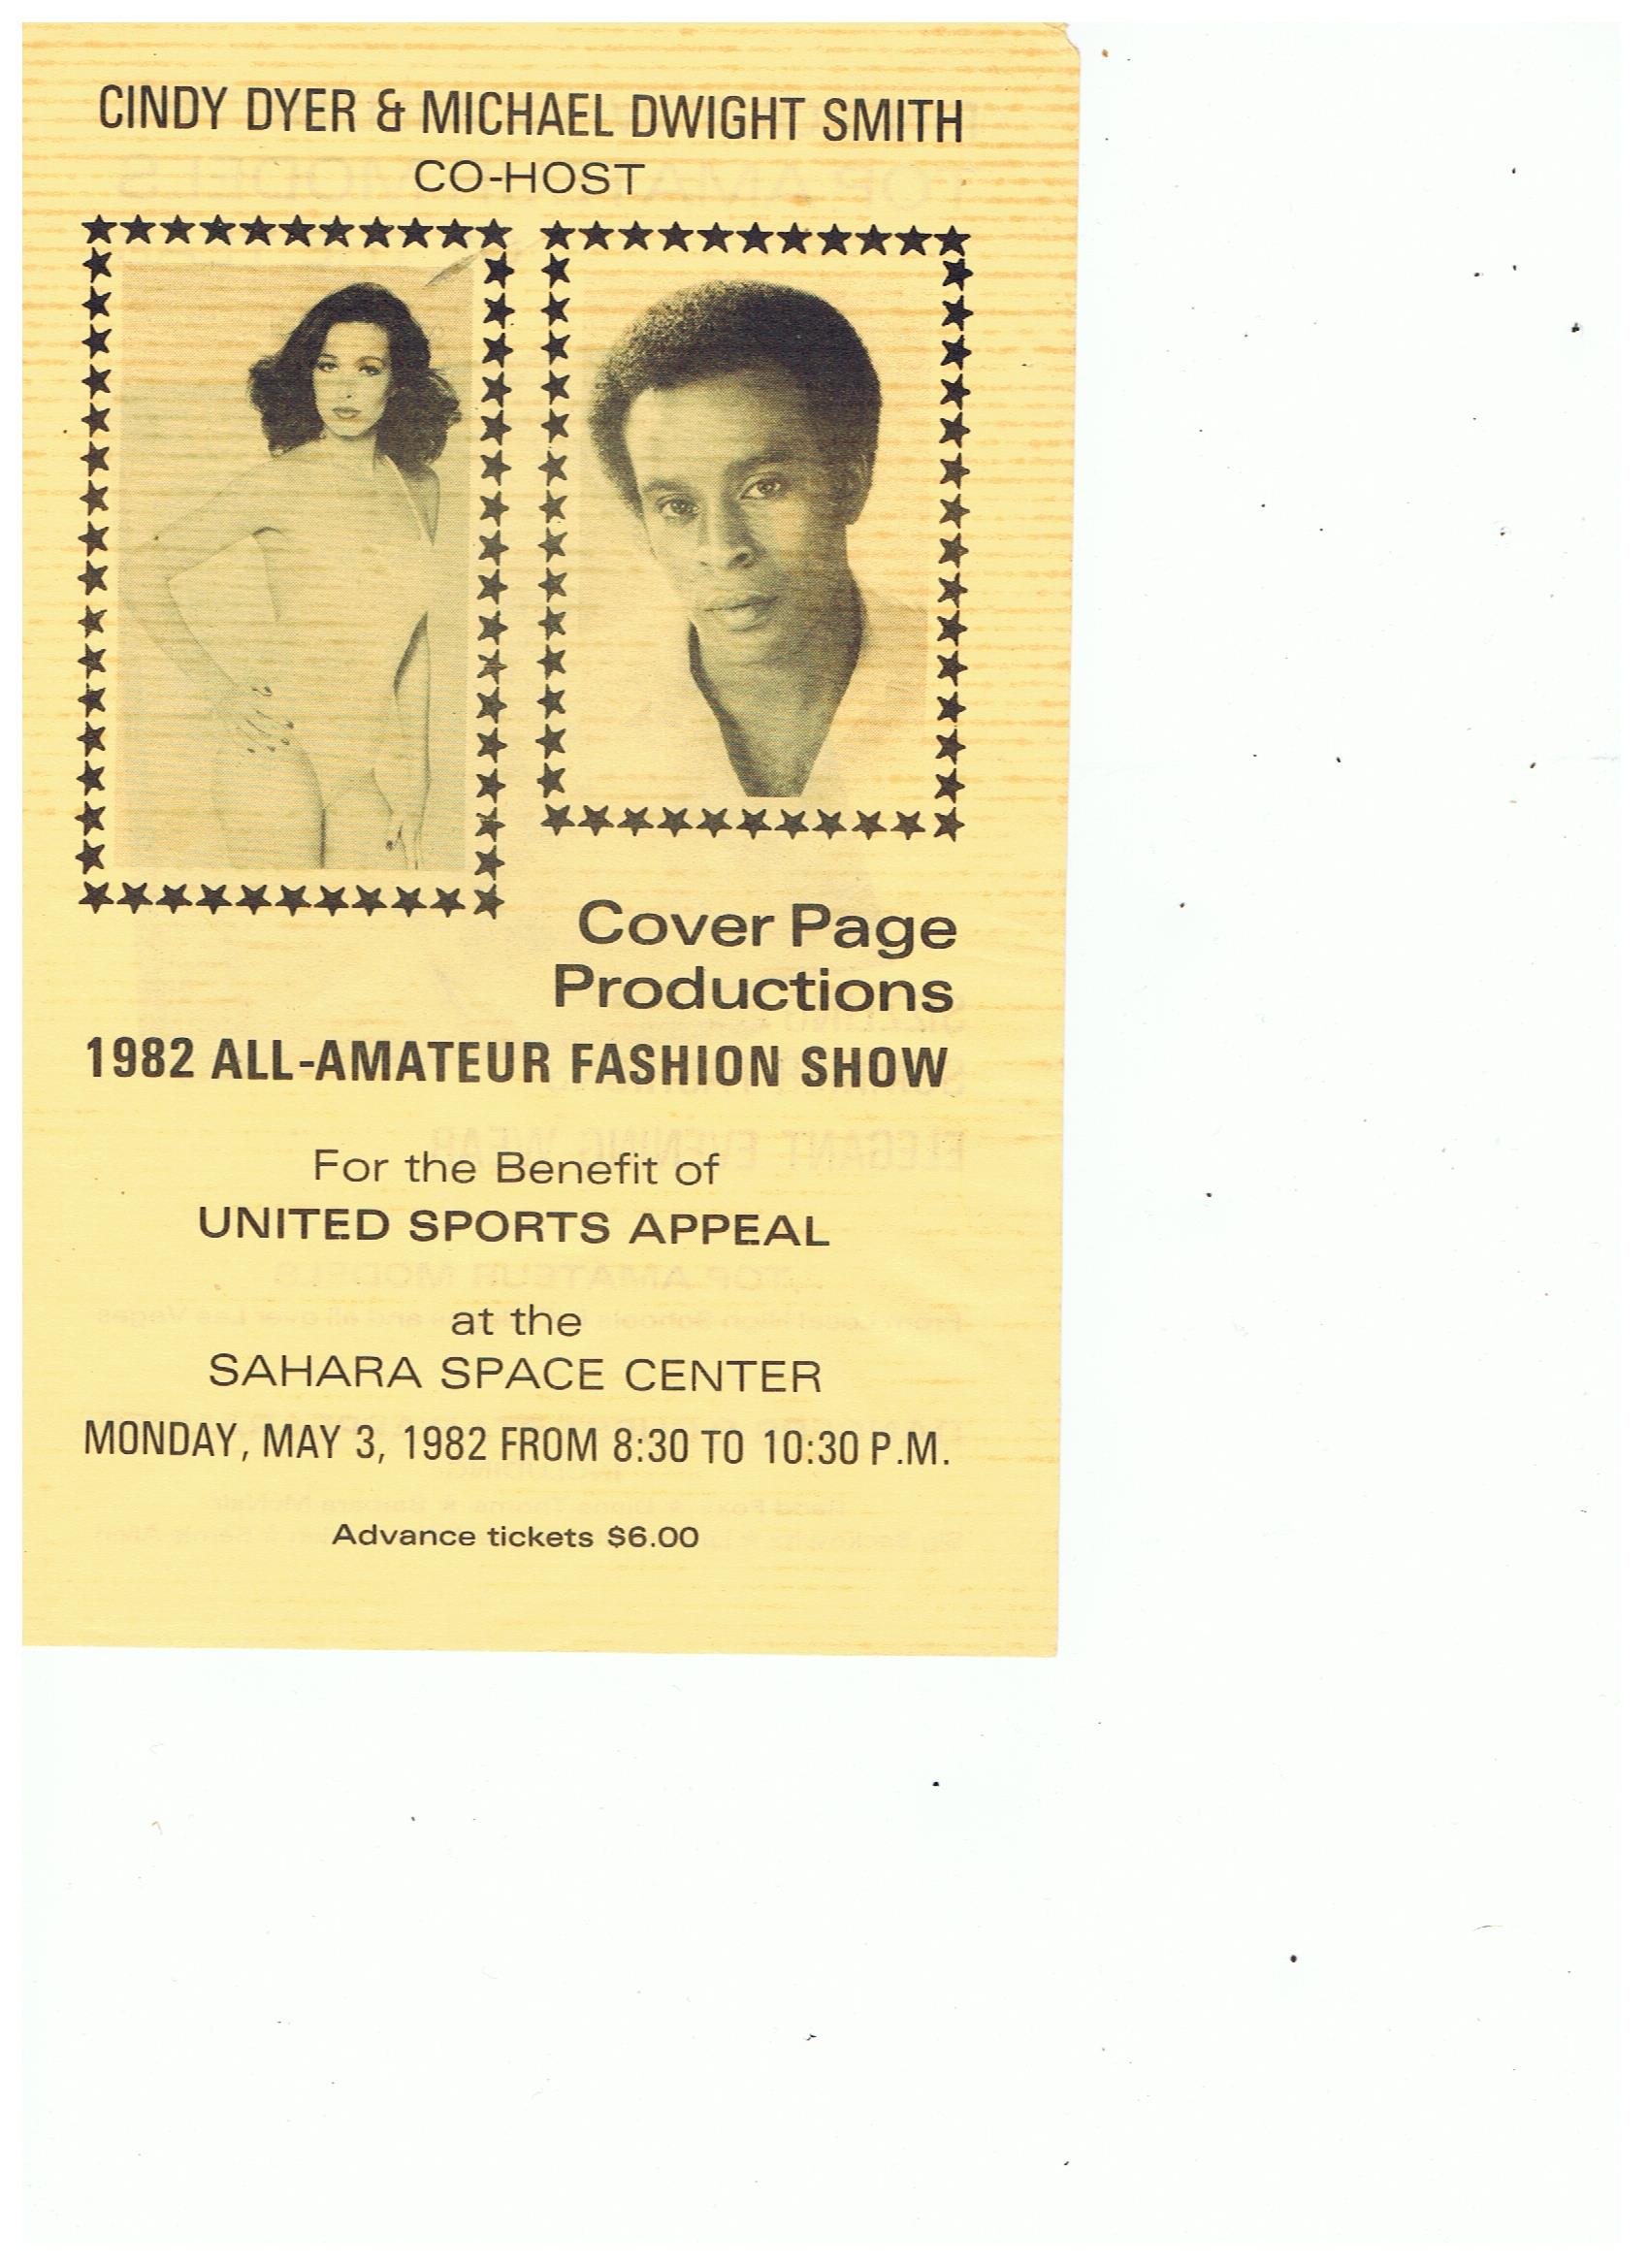 Michael Dwight Smith is Host of the All-Amateur Fashion Show, at Sahara Hotel in Las Vegas. Benefitting United Sports Appeal.